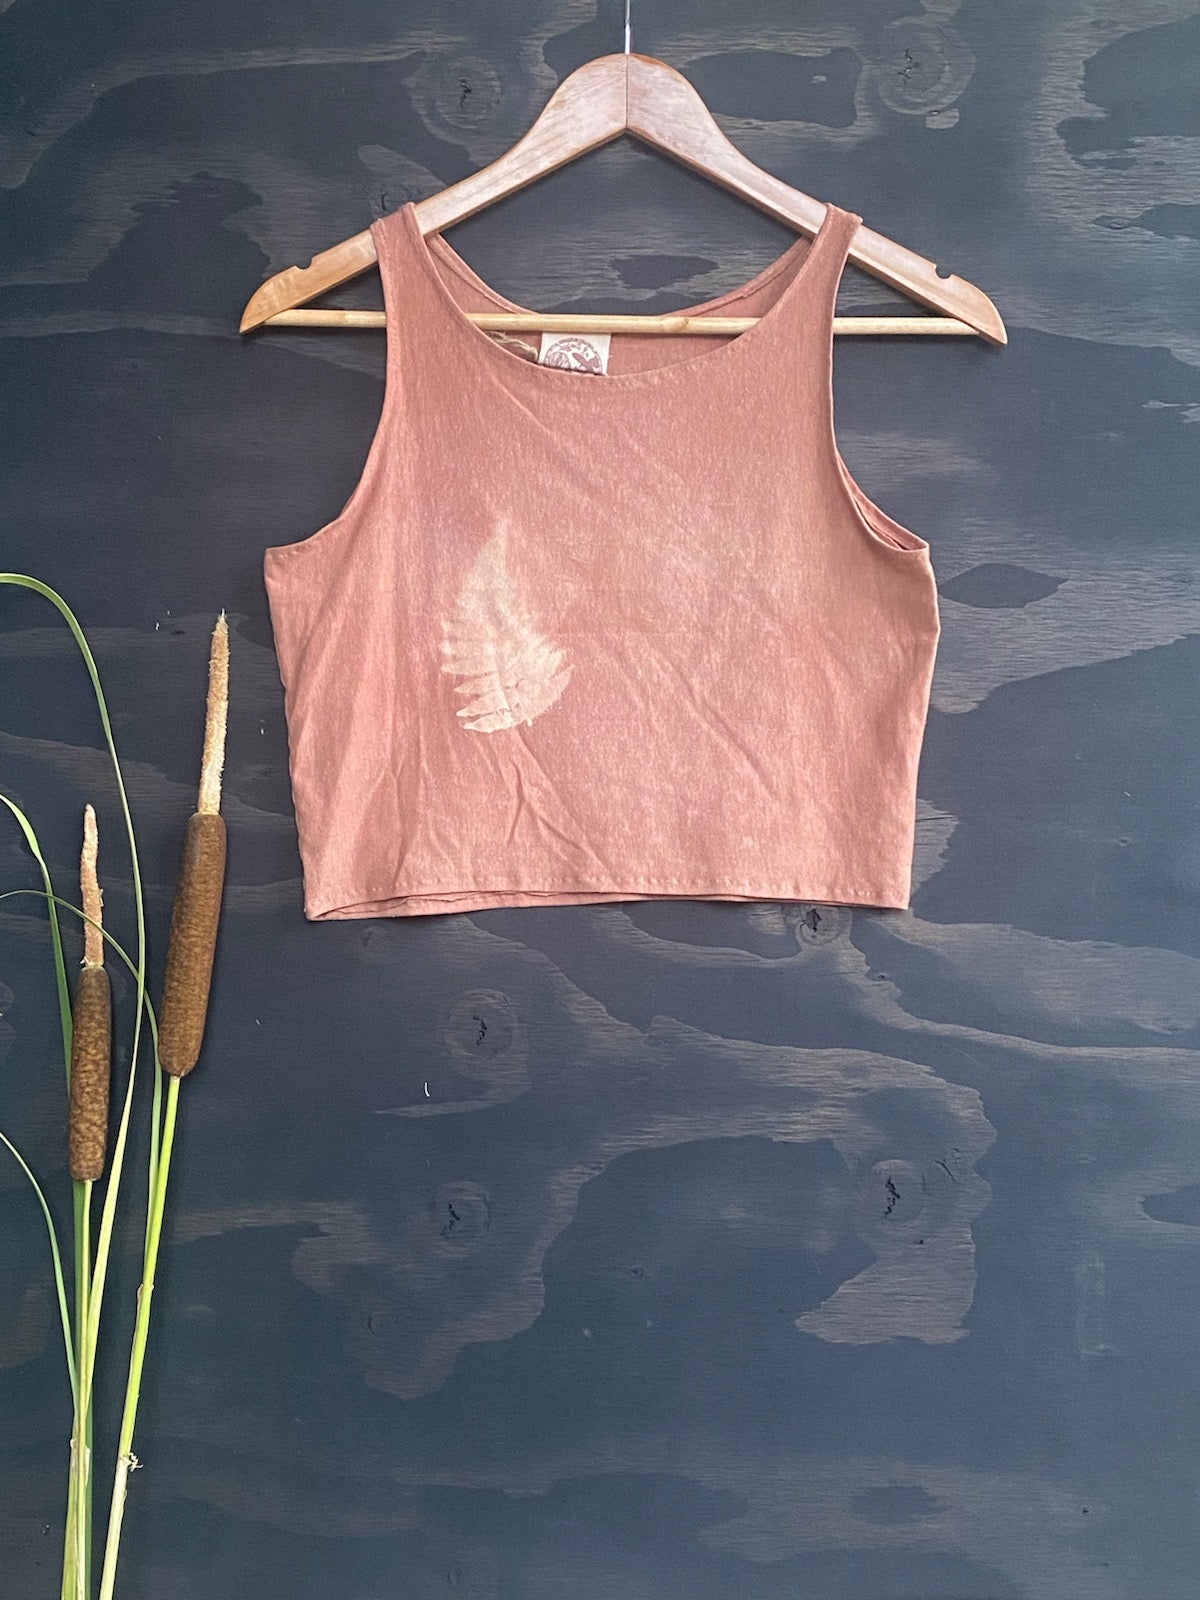 Black background with Rose Pink Tank Top with Printed Fern hanging on a wooden hanger